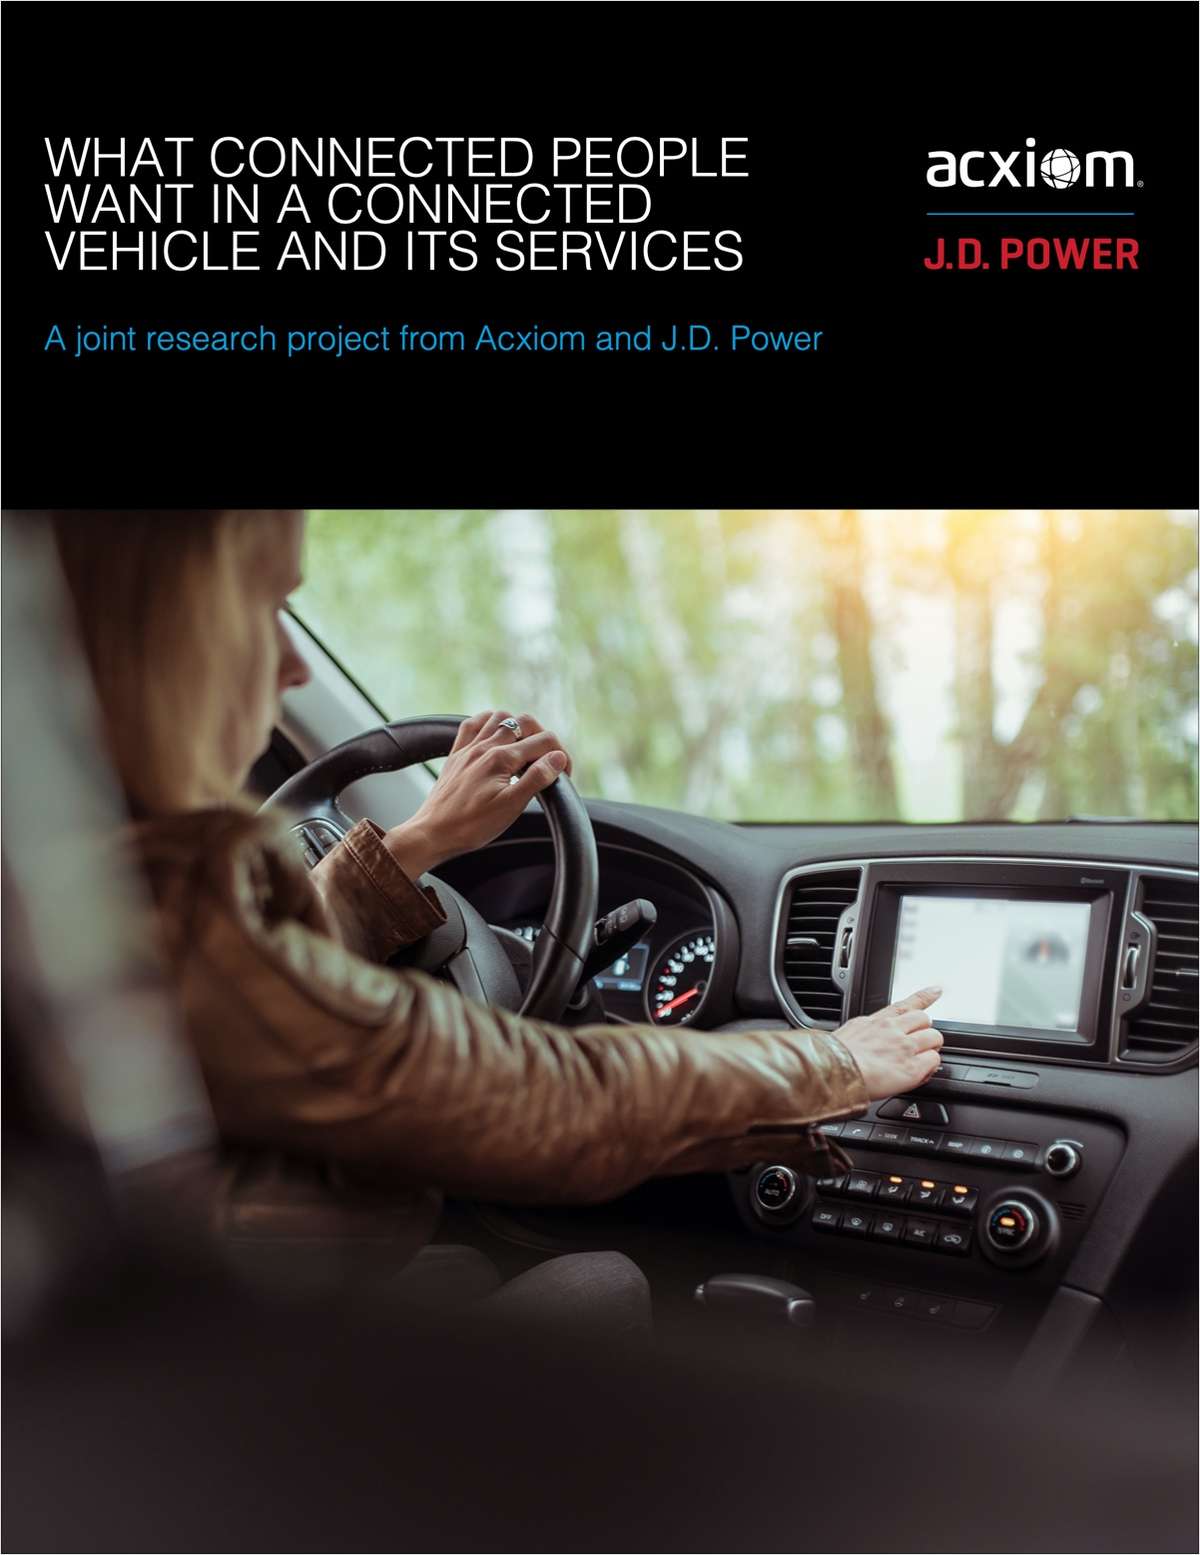 What Connected People Want from a Connected Vehicle and Its Services